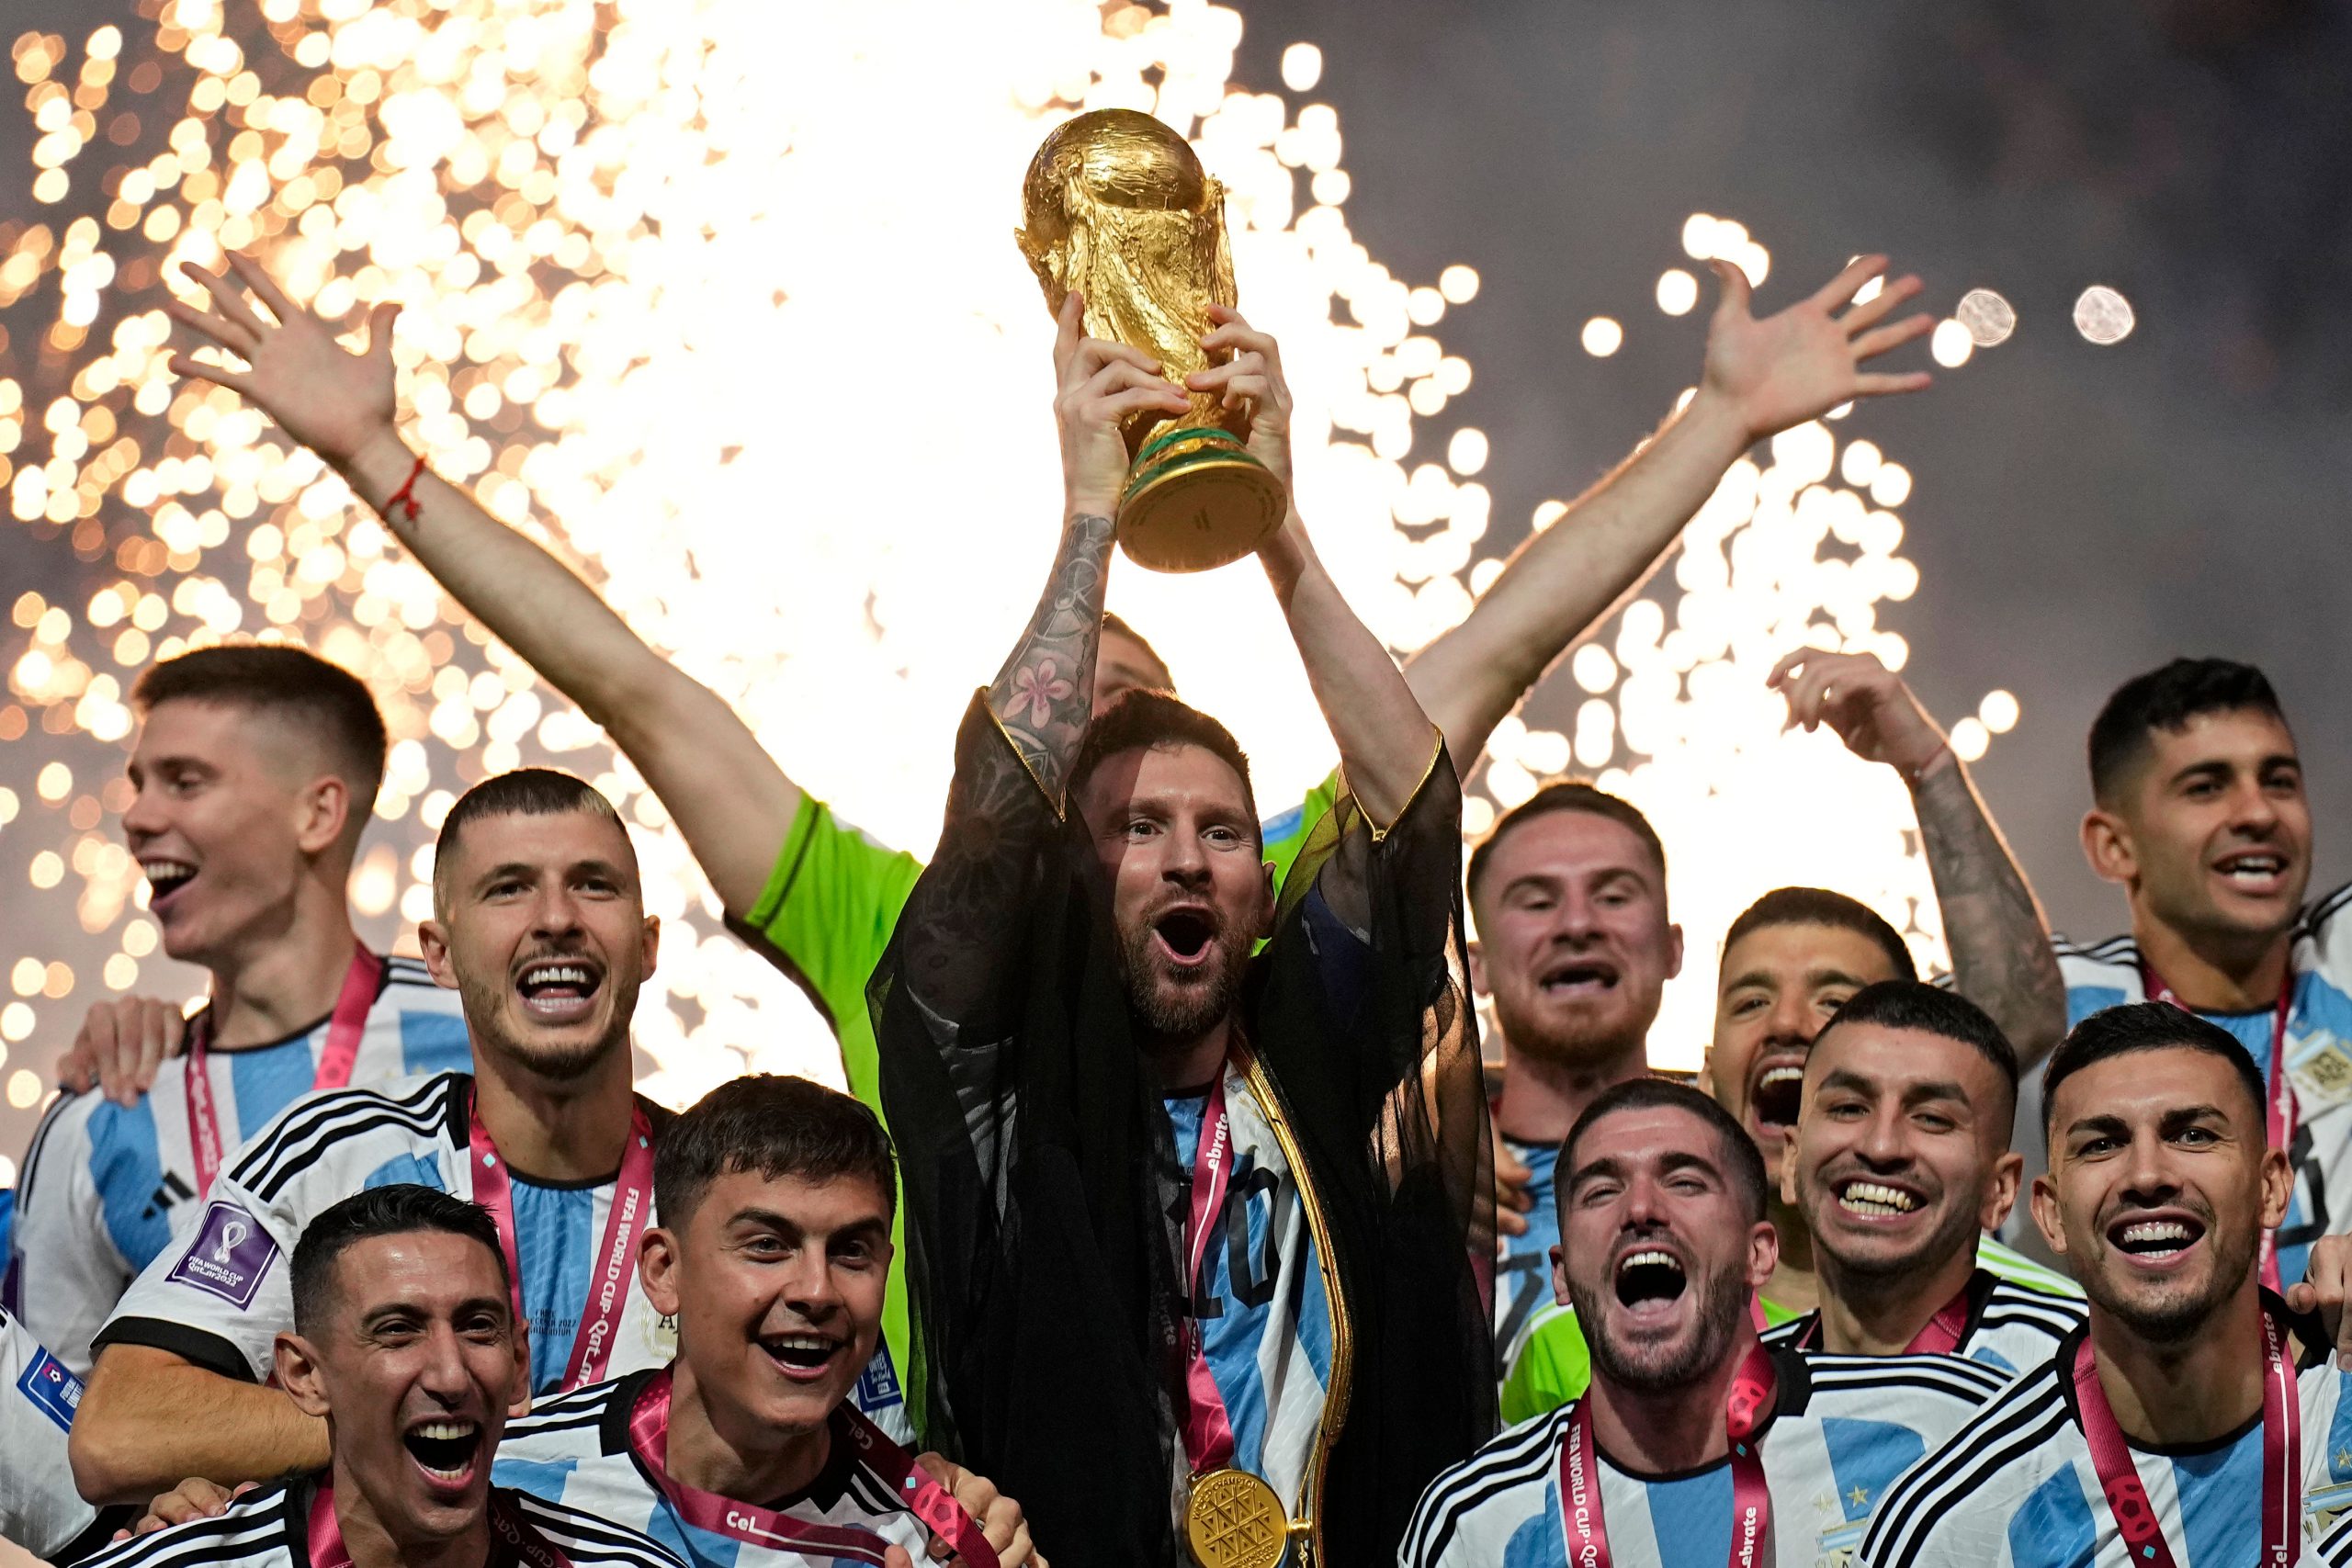 Argentina vs France FIFA World Cup final recorded 16.783 million views, highest in US history: Report